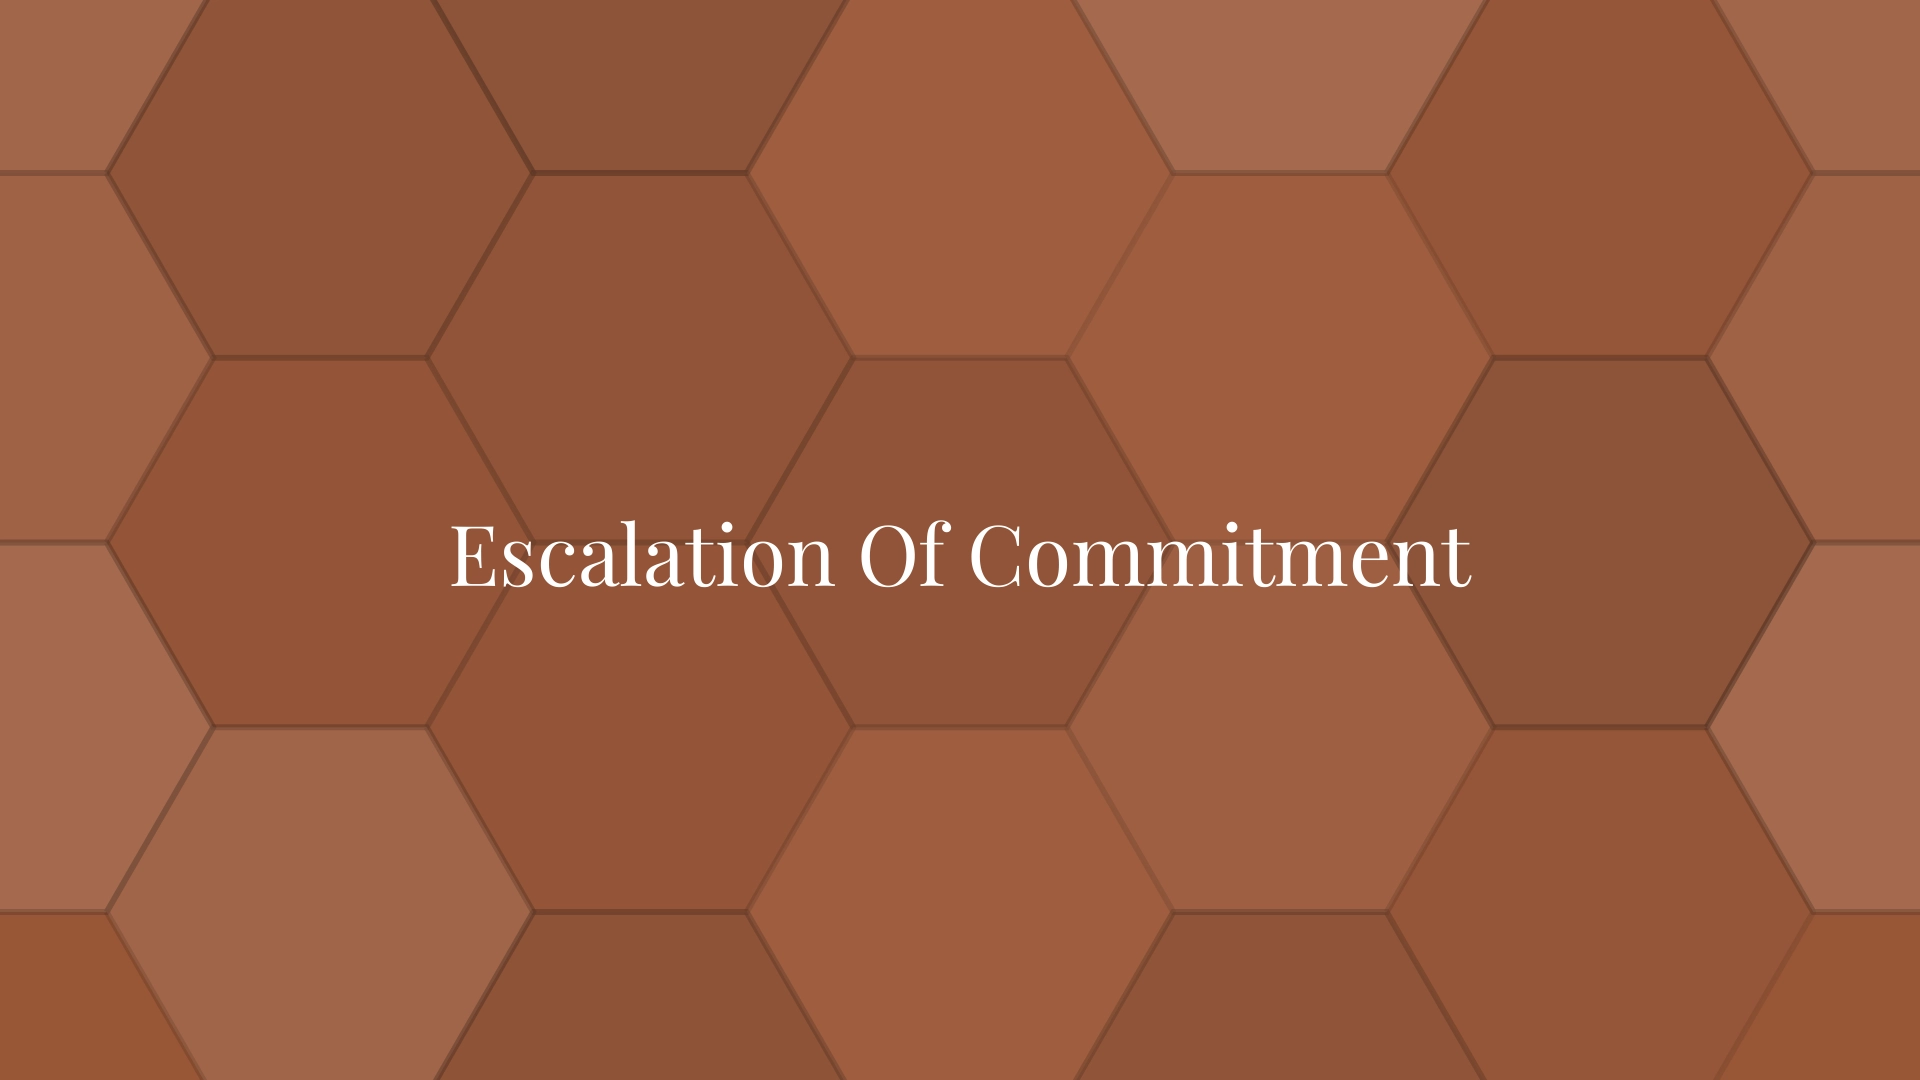 Escalation Of Commitment